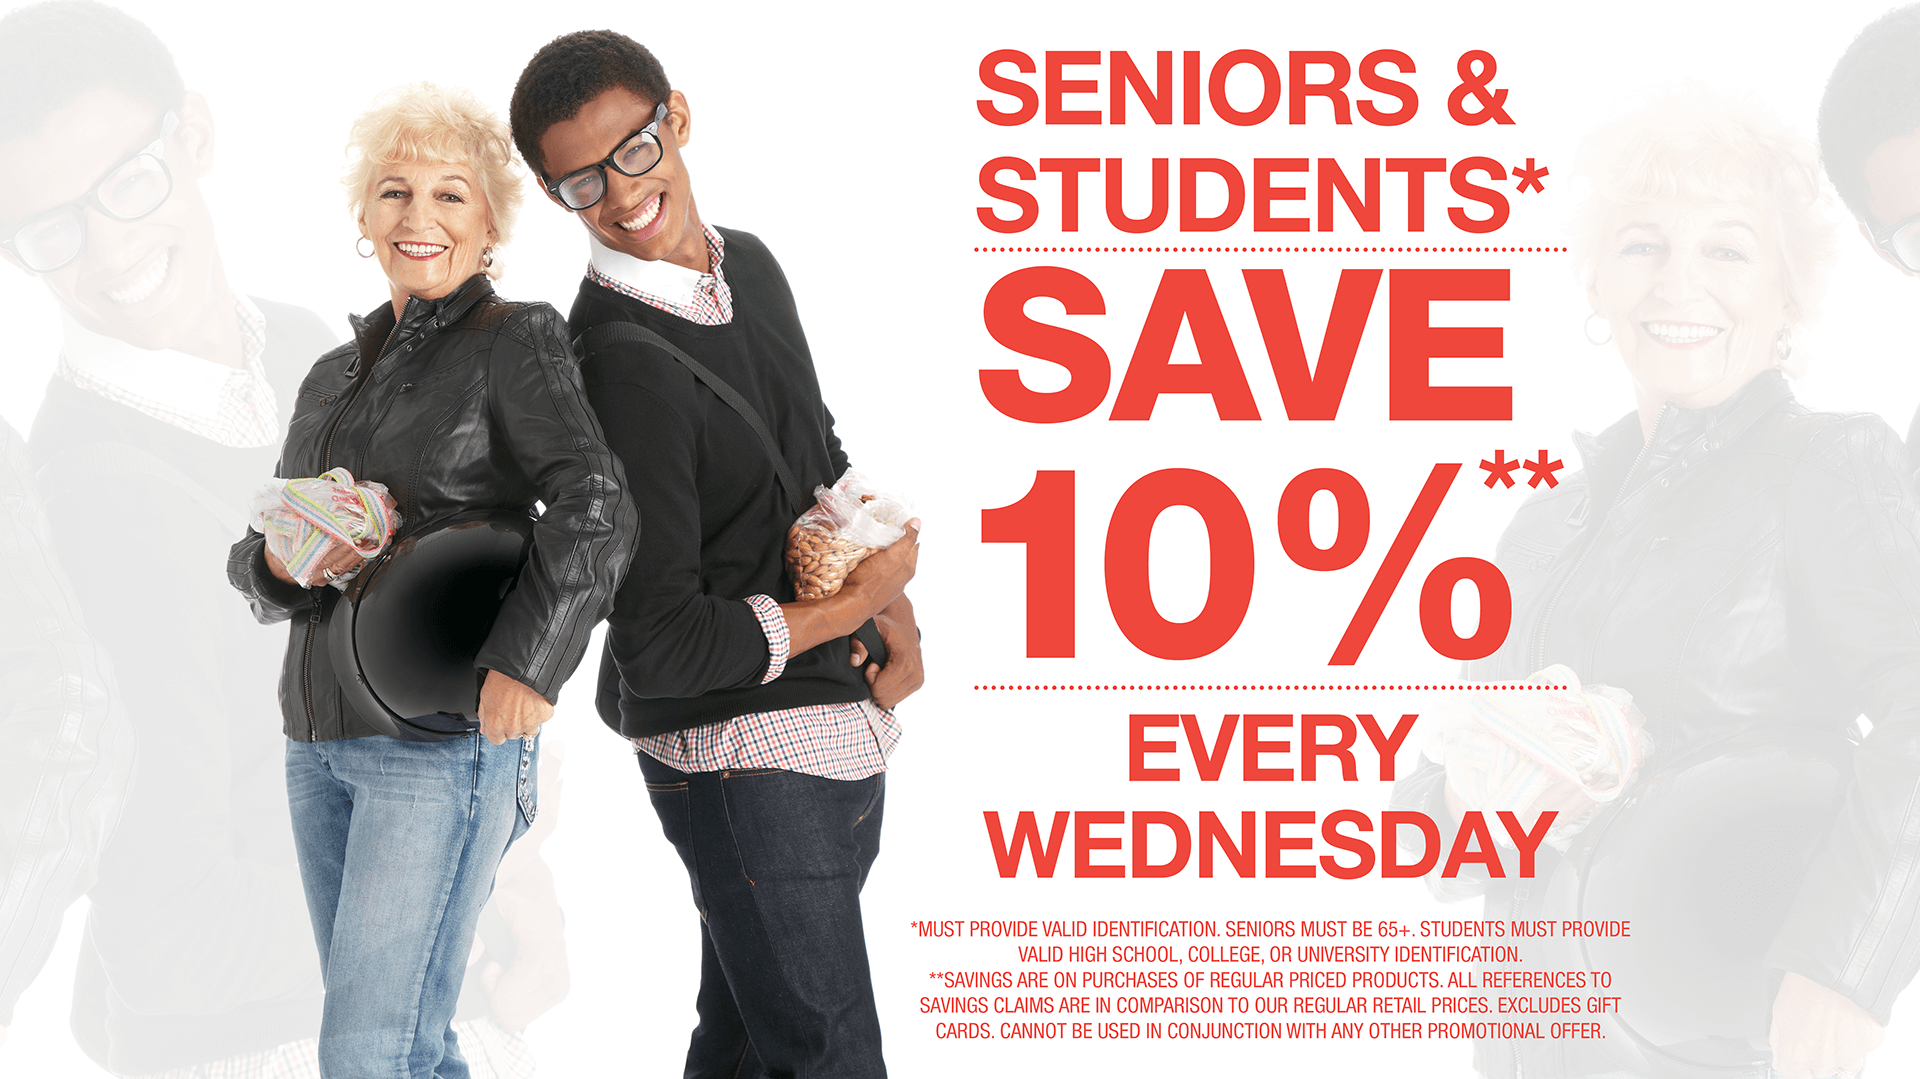 10% Discount Seniors and Students Every Wednesday. (*MUST PROVIDE VALID IDENTIFICATION. Seniors must be 65+. STUDENTS MUST PROVIDE VALID HIGH SCHOOL, COLLEGE OR UNIVERSITY IDENTIFICATION. EXCLUDES GIFT CARDS. CANNOT BE USED IN CONJUNCTION WITH ANY OTHER PROMOTIONAL OFFER.)